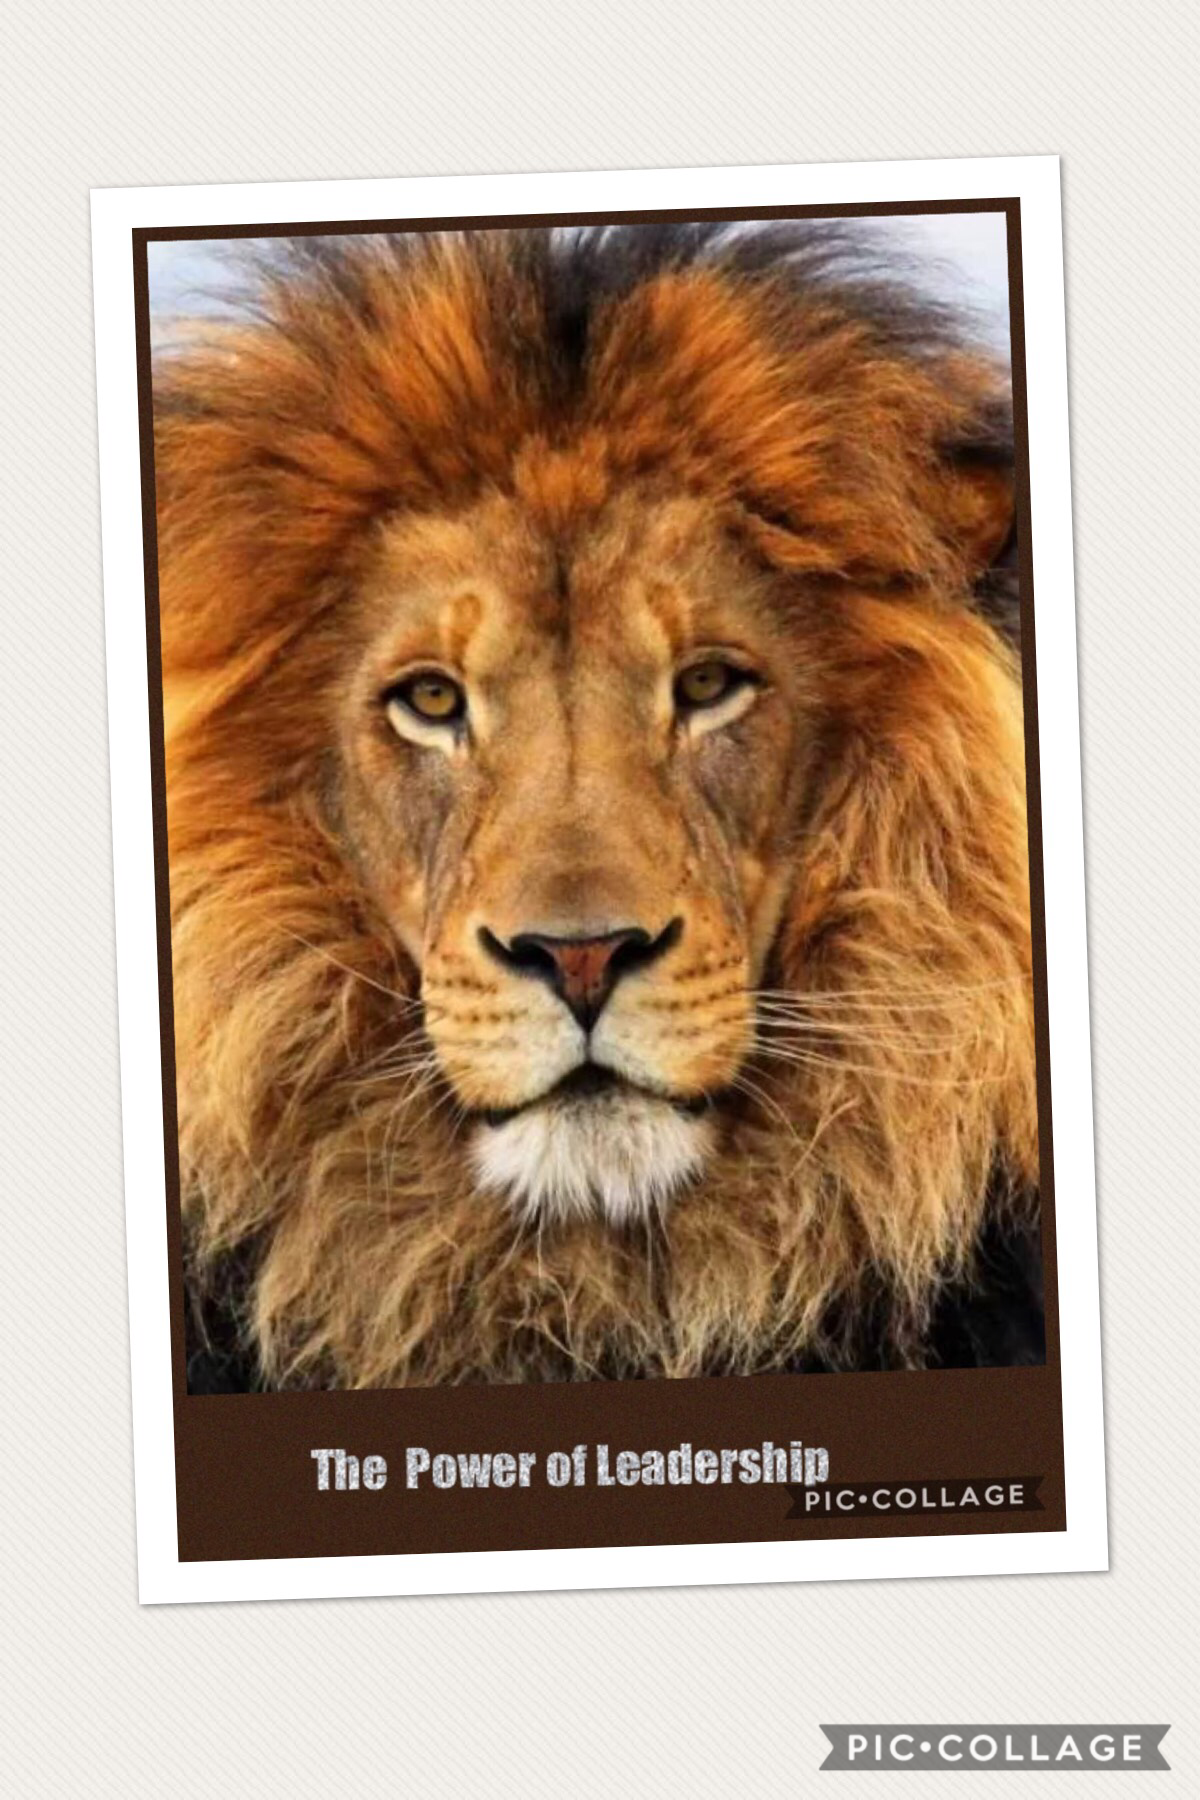 The power of leadership